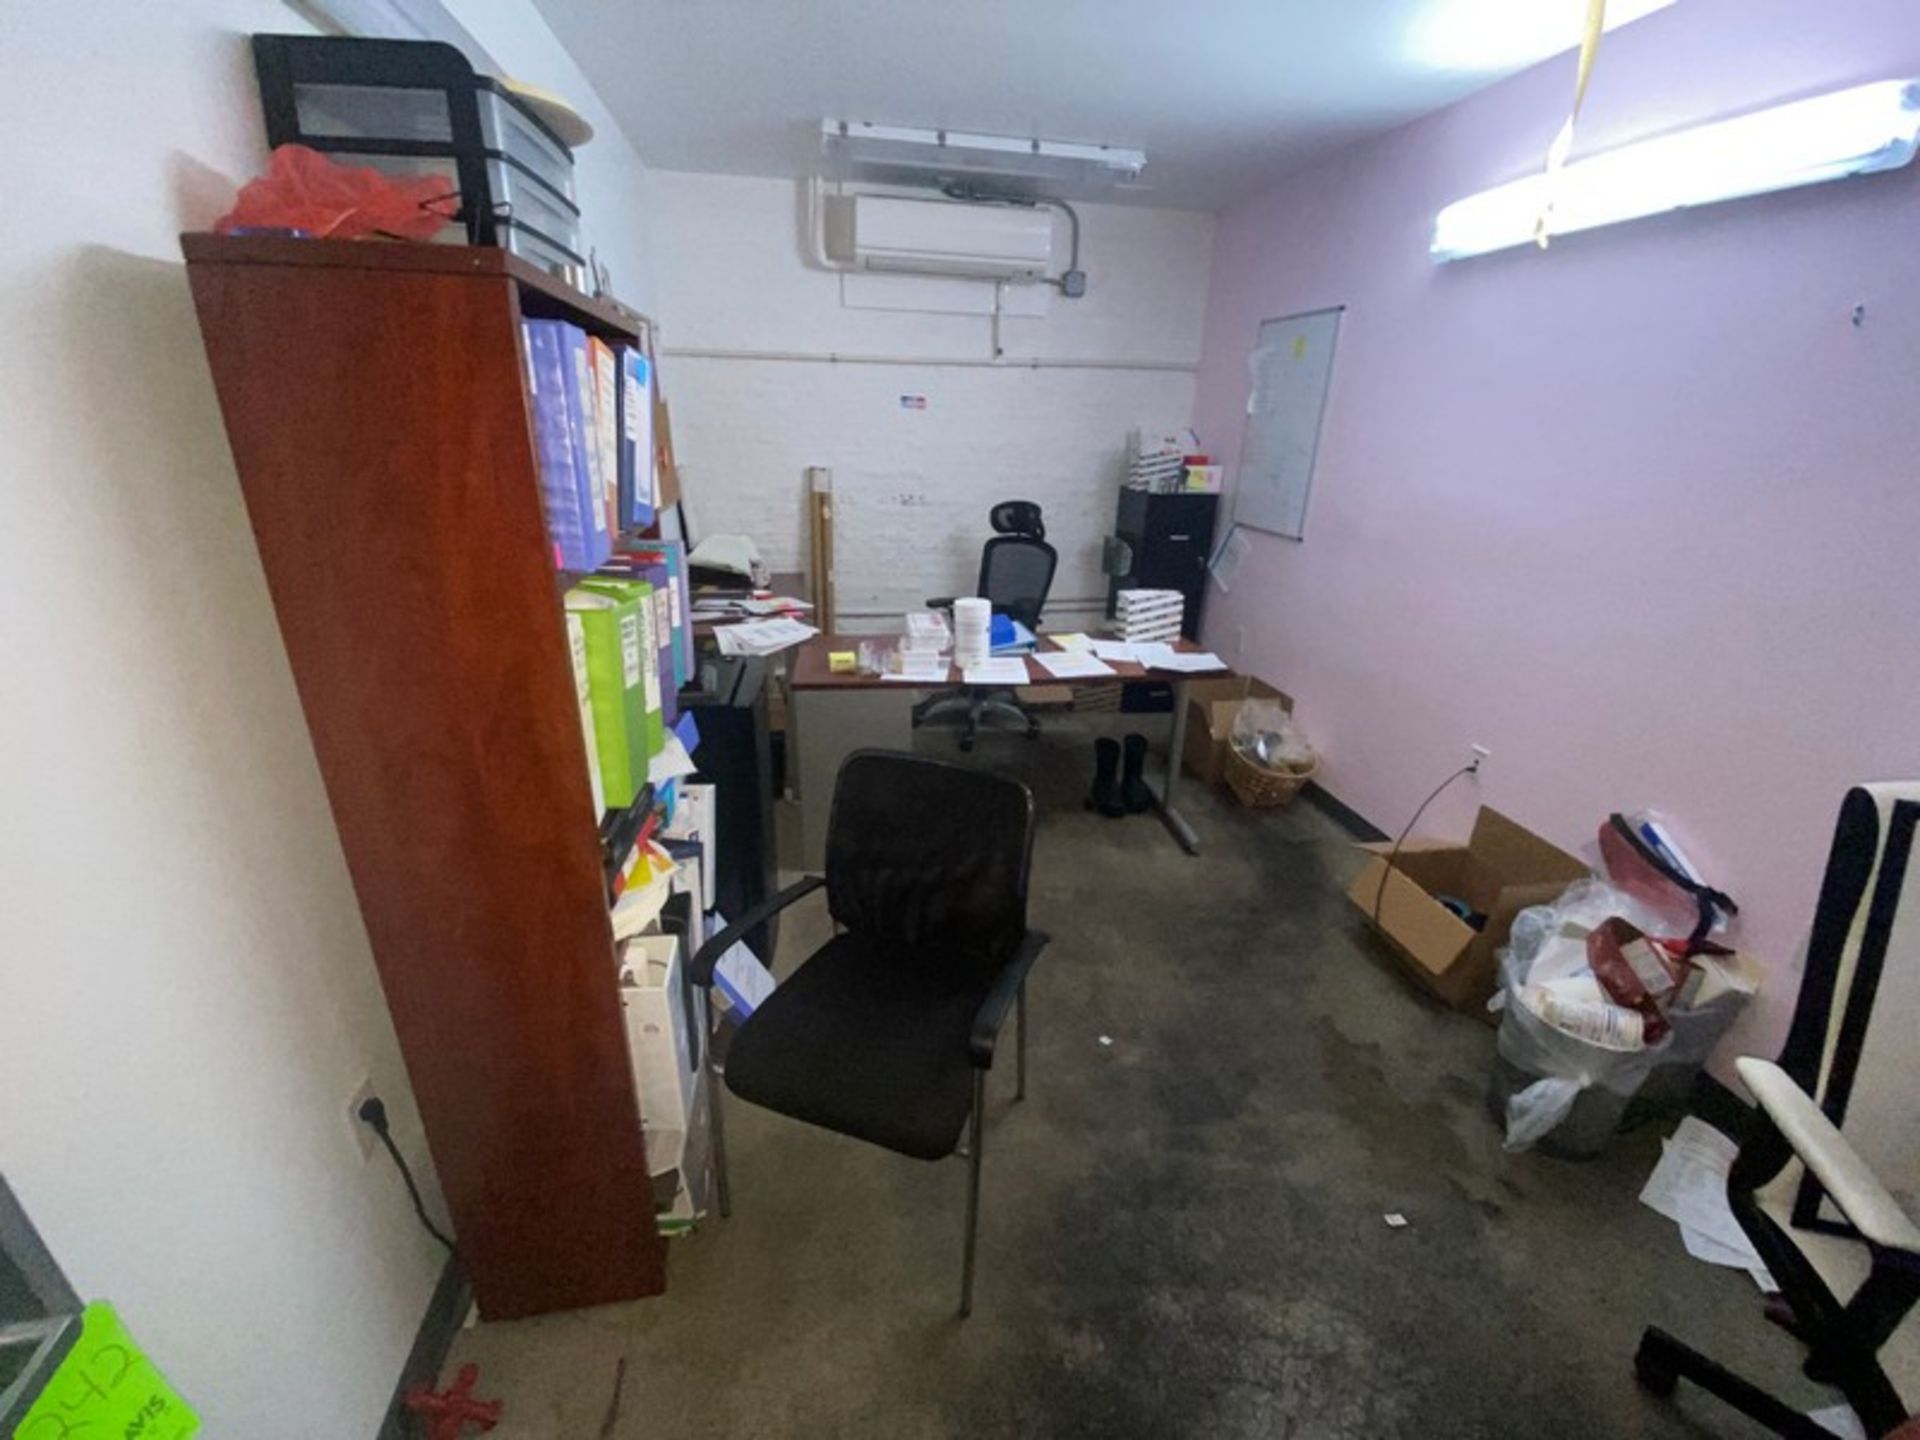 Contents of Office Area, Includes Book Shelf, Table, (2) Office Chairs, & (1) Vertical Filing